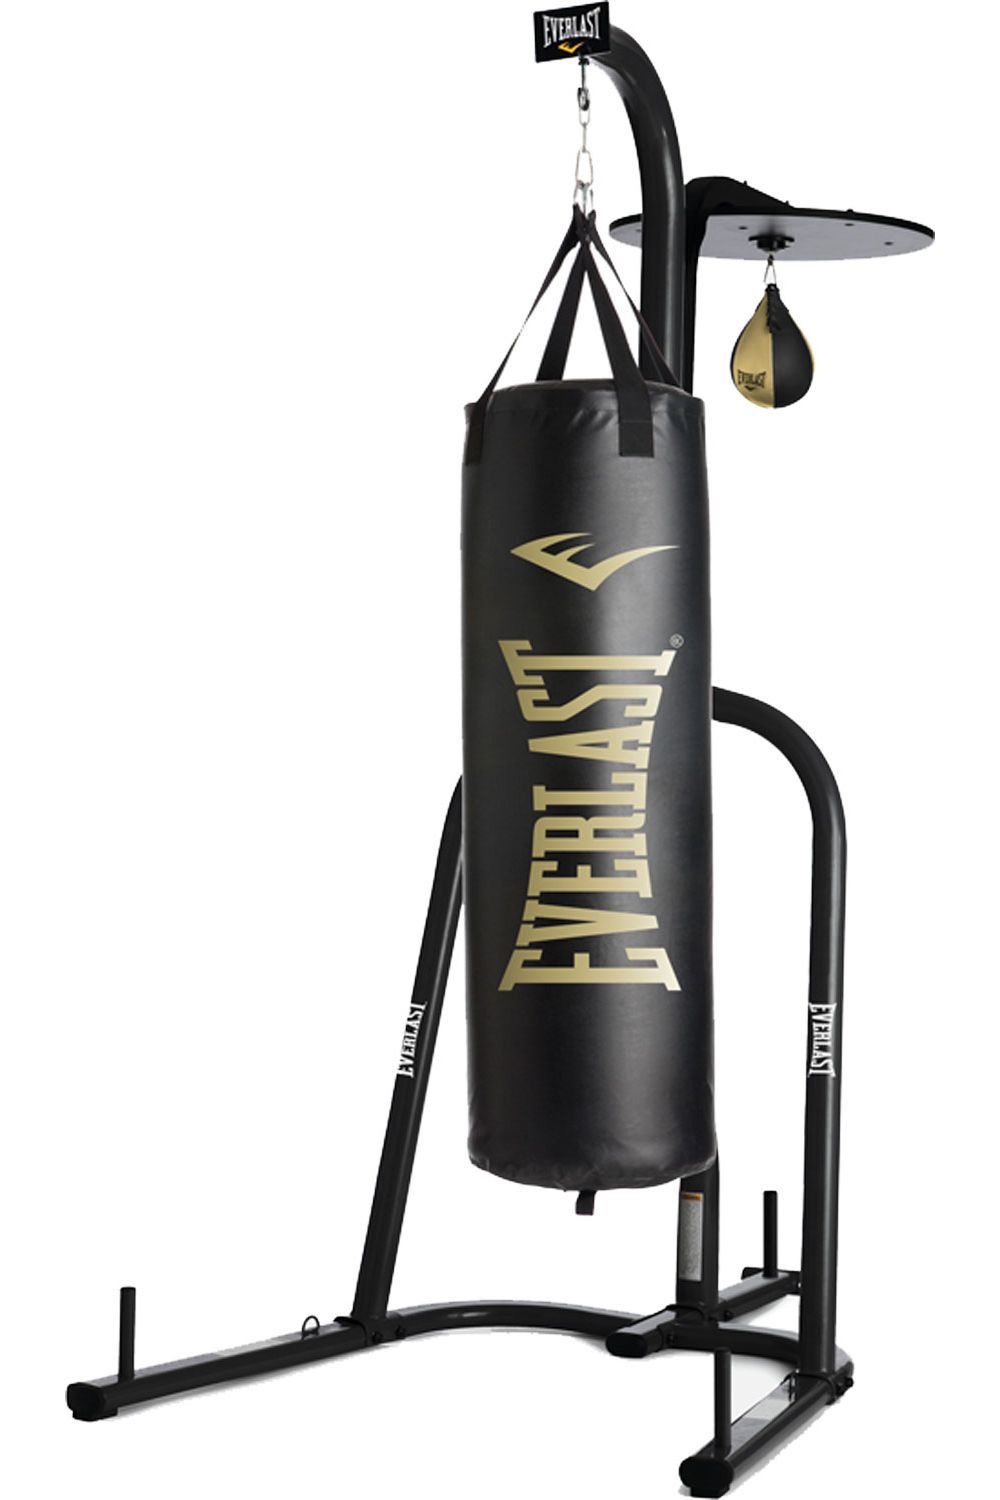 Heavy bag stand with speed bag